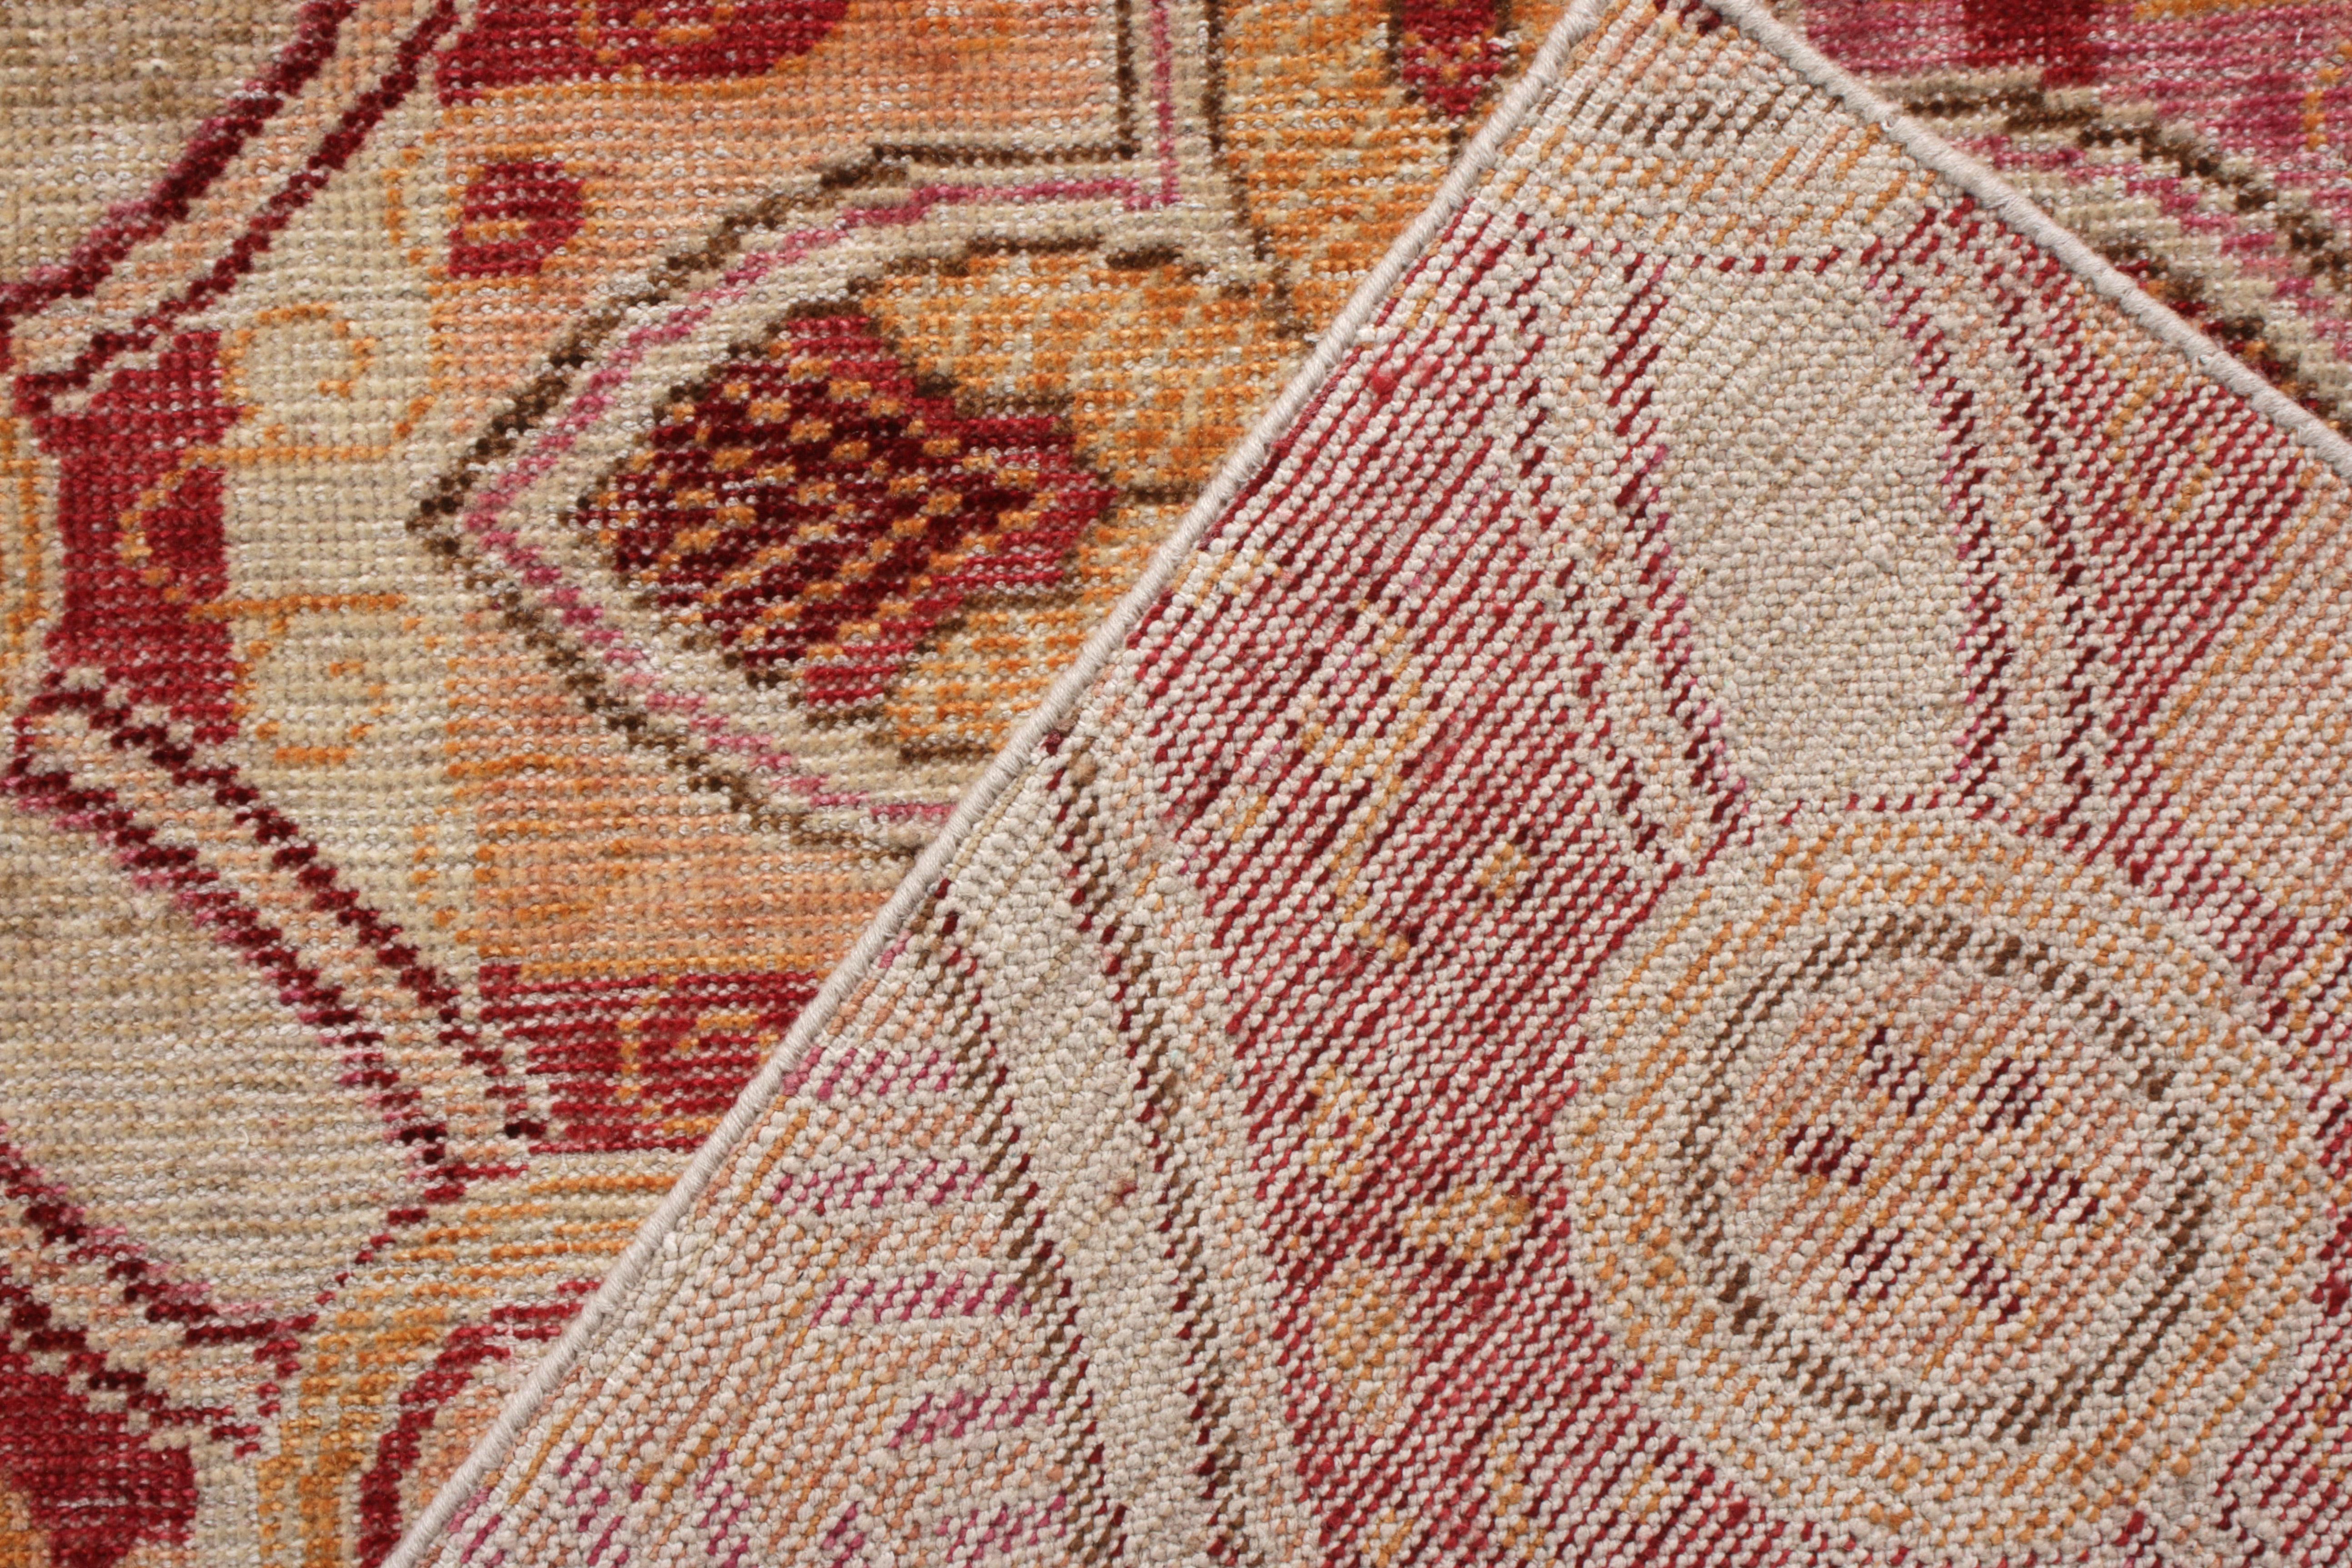 Rug & Kilim’s Distressed Style Floral Rug in Red and Pink Classic Floral Pattern In New Condition For Sale In Long Island City, NY